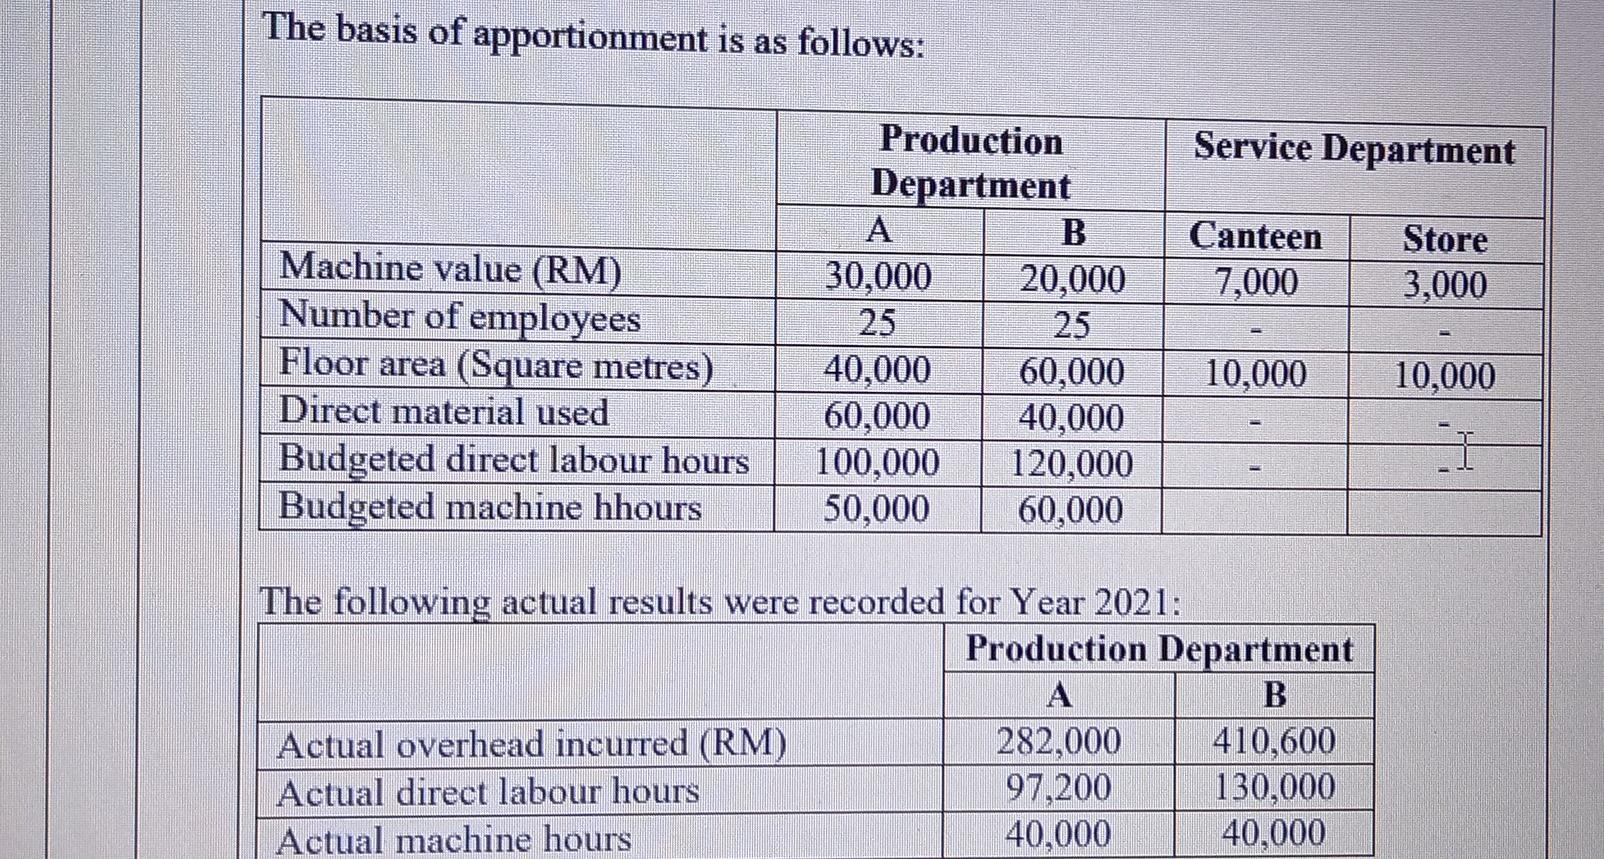 The basis of apportionment is as follows:Service DepartmentCanteen7,000Store3,000Machine value (RM)Number of employees